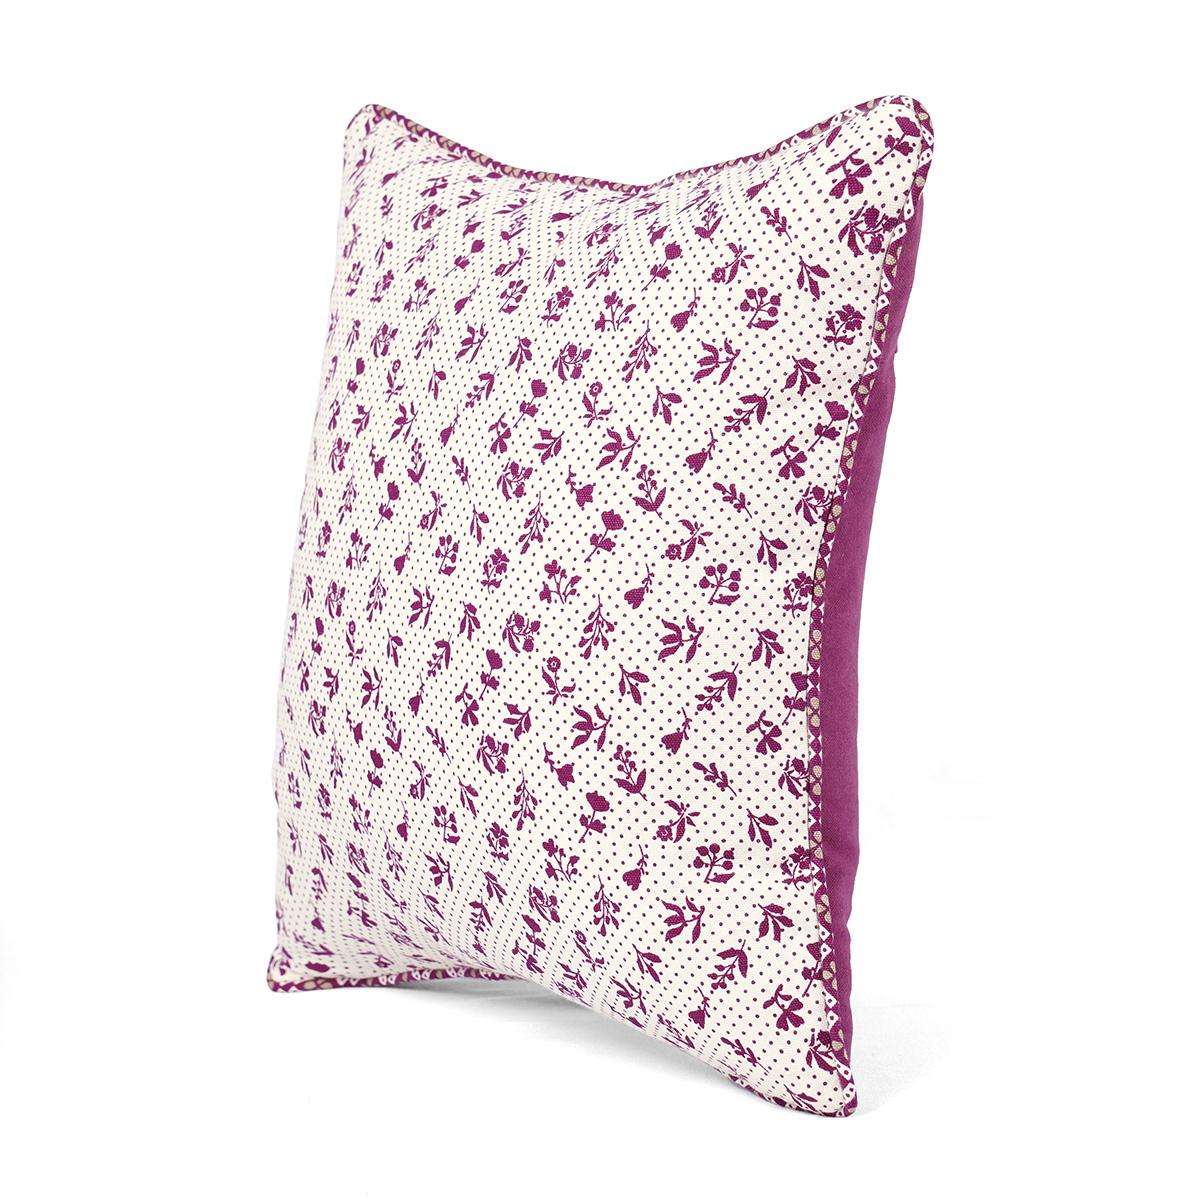 Plum DOMINOTERIE small floral print cotton pillow cover, sizes available